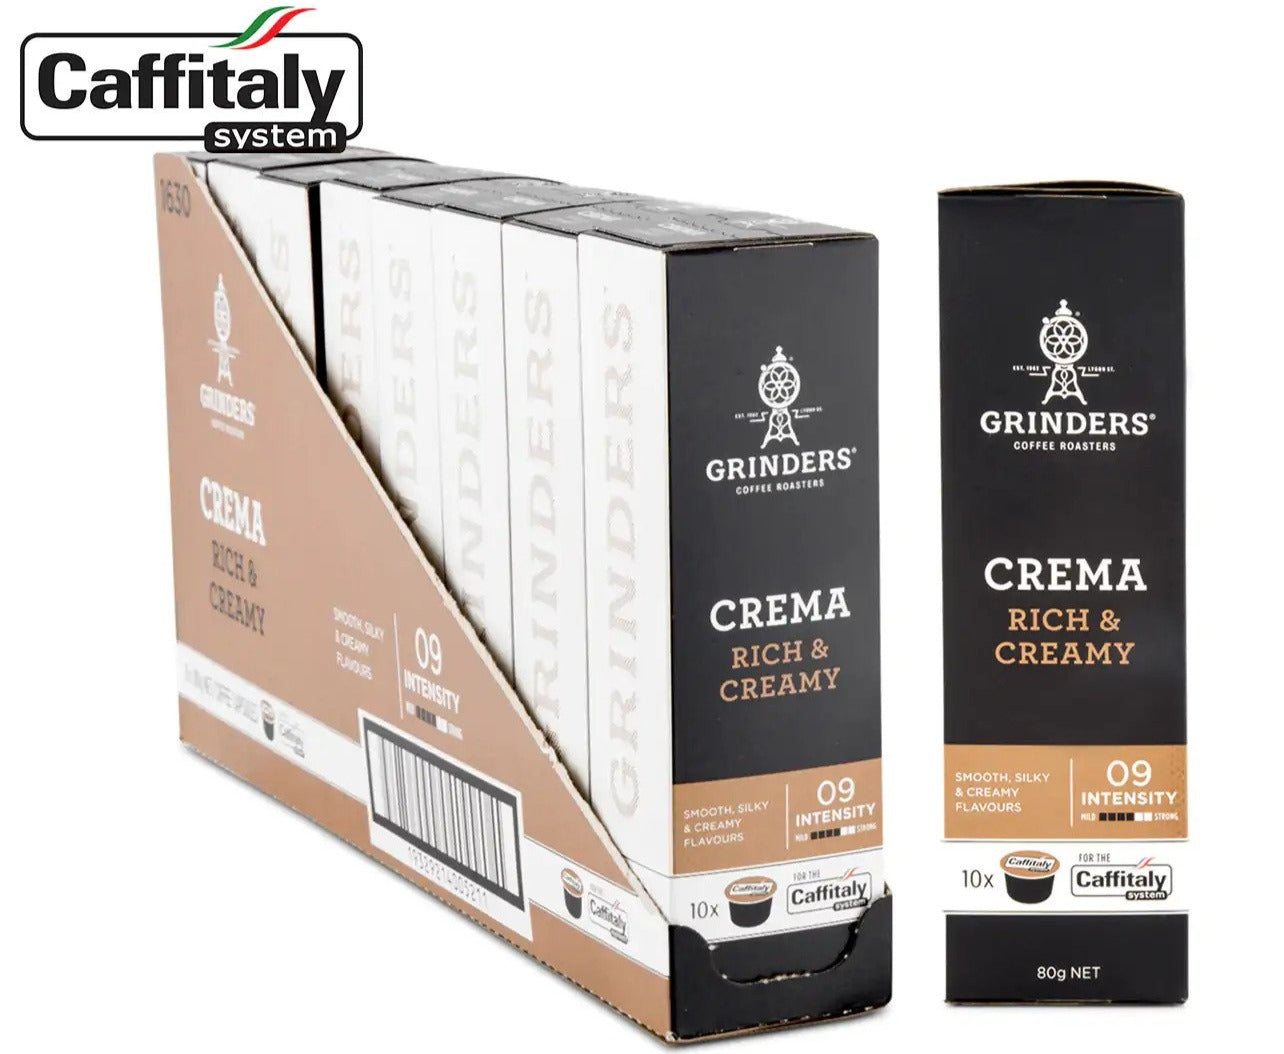 8 x Grinders Crema Rich & Creamy Caffitaly Coffee Capsules 10pk